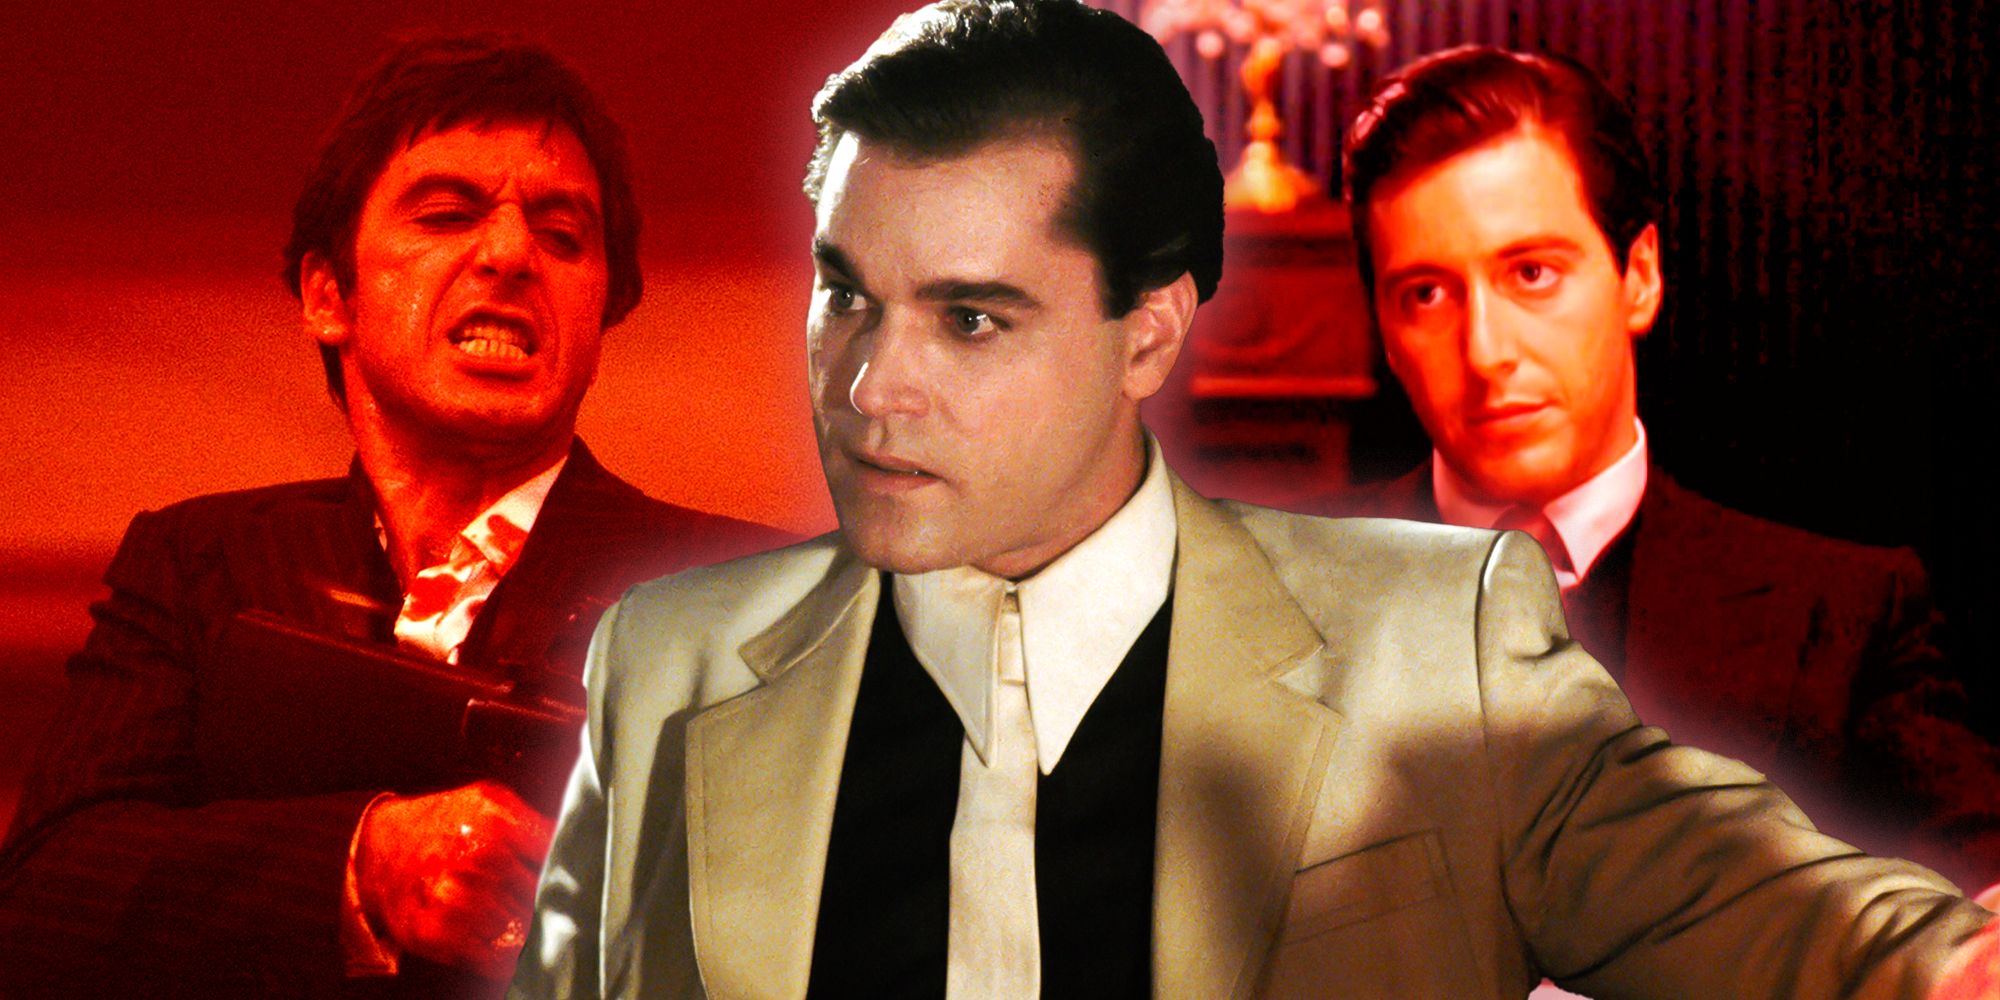 Collage of Tony Montana in Scarface, Henry Hill in Goodfellas, and Michael Corleone in The Godfather